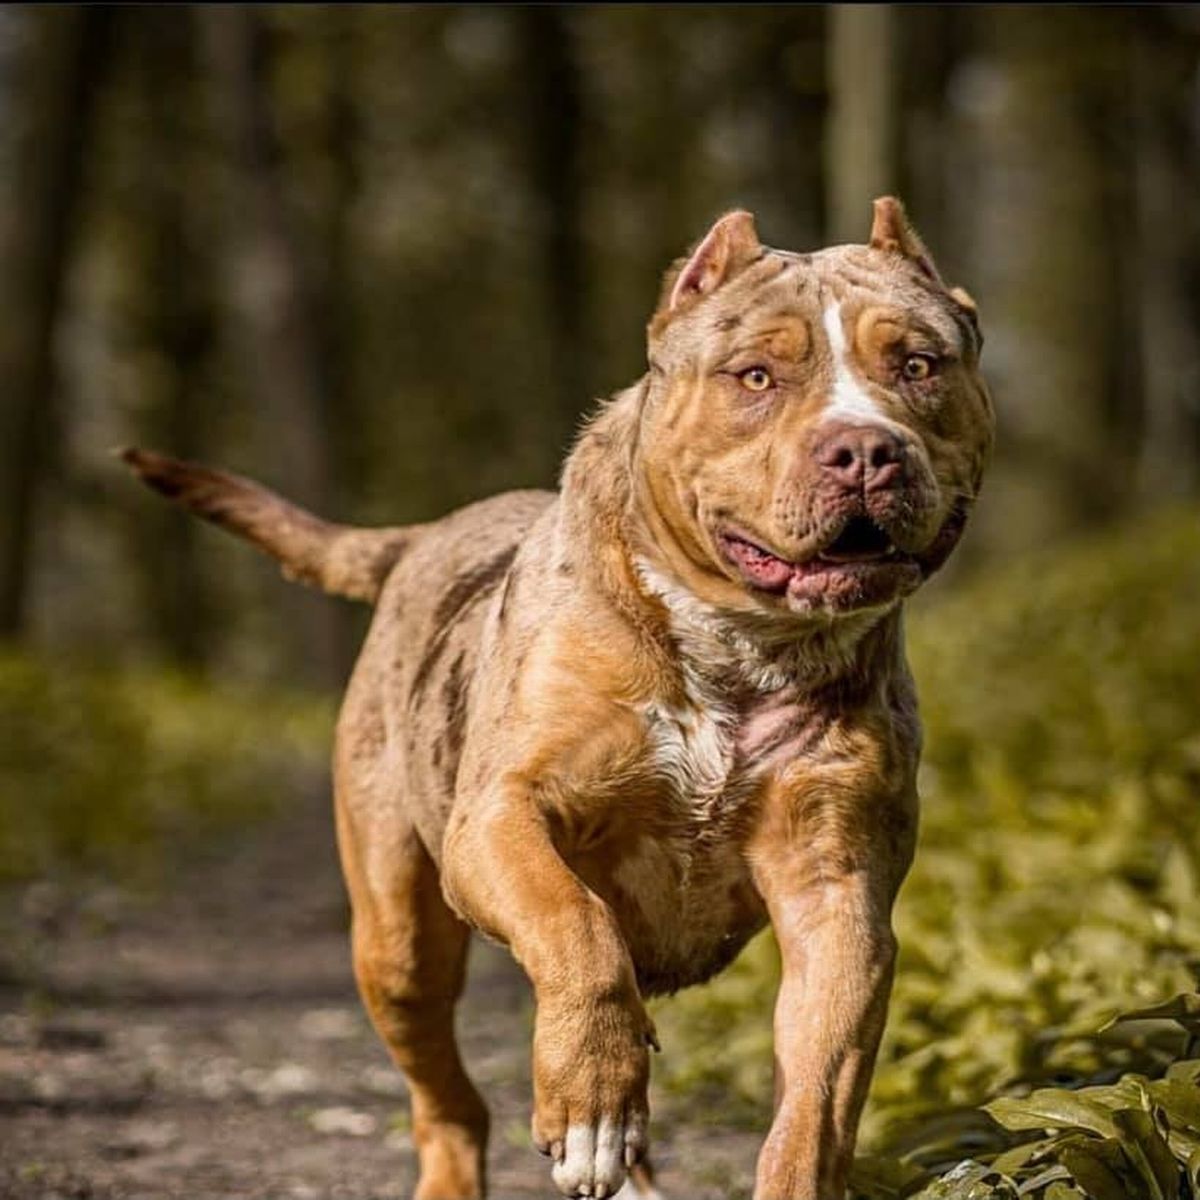 What is the most dangerous dog breed?